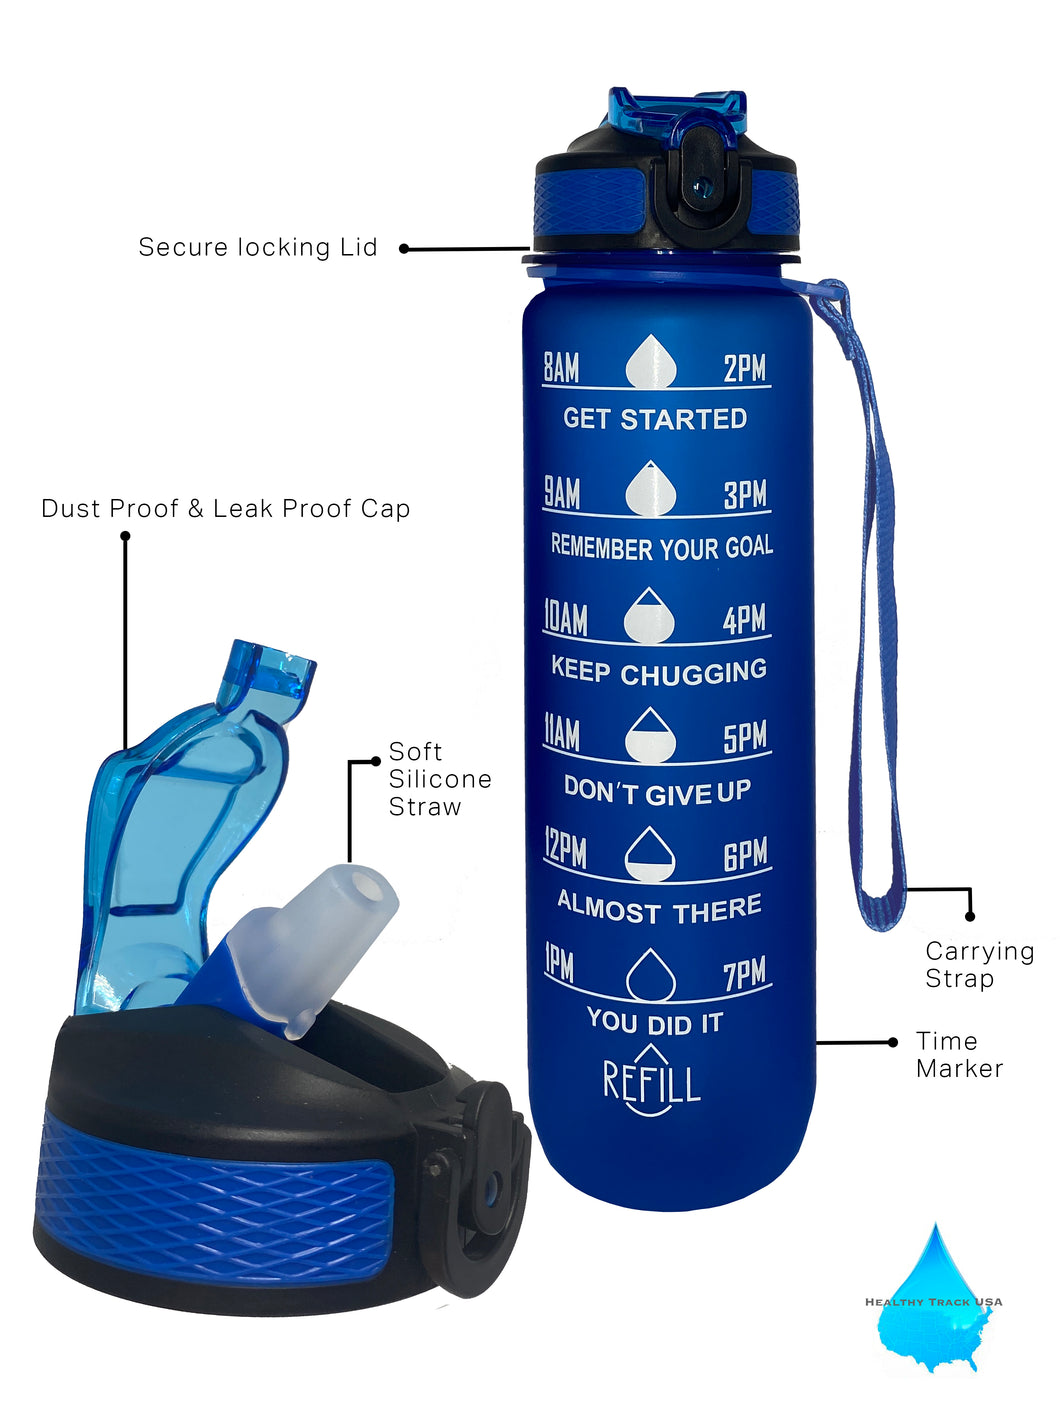 32 Oz Inspirational Time Water Bottle with Hydrating Reminder Tracker. Motivational Outdoor Sport Water Bottle. BPA Free, Color Blue